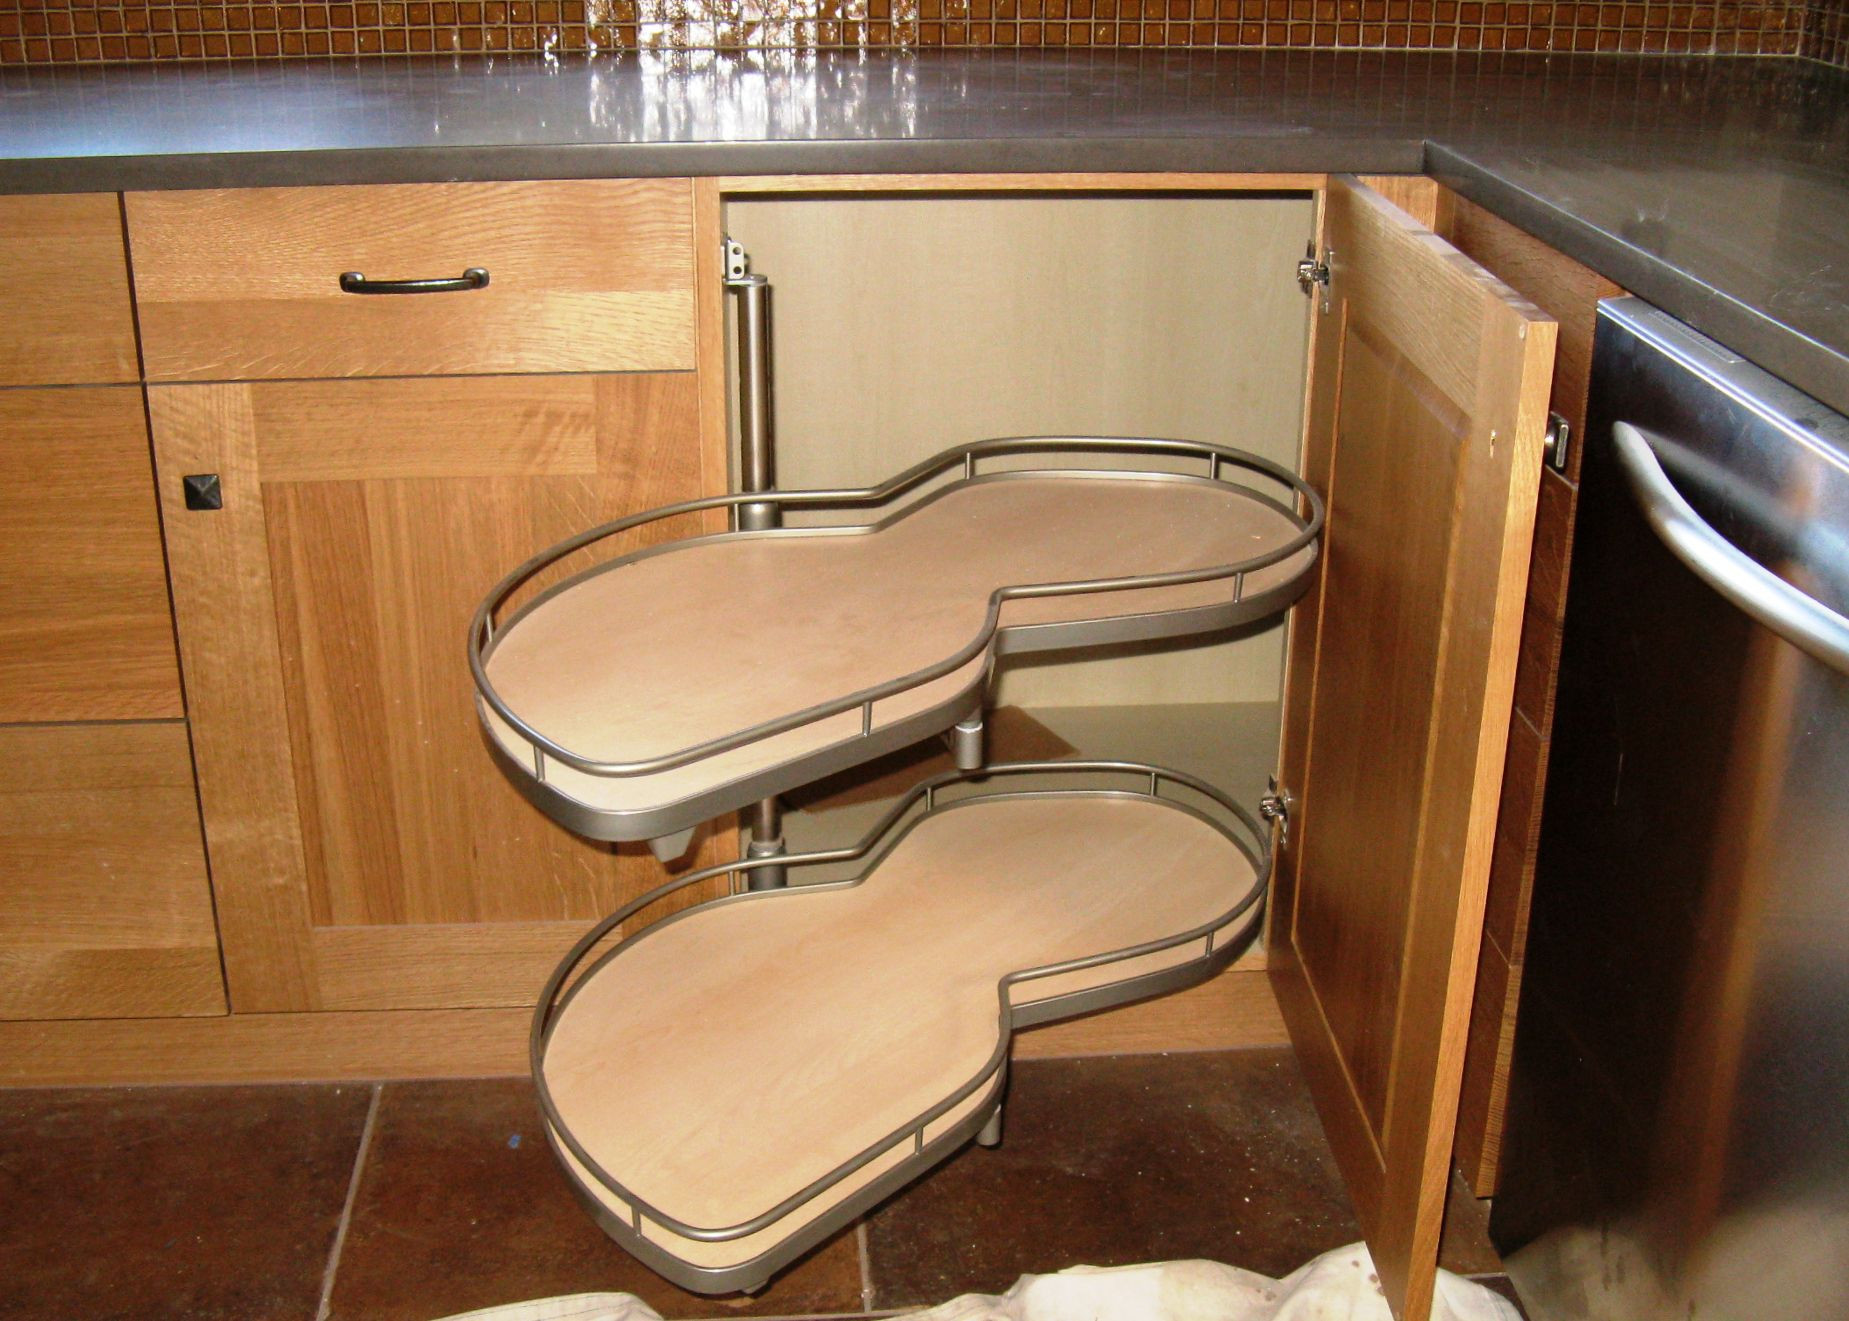 DIY Blind Corner Cabinet Organizer
 Increase the Functionality of Your Blind Corner Cabinet